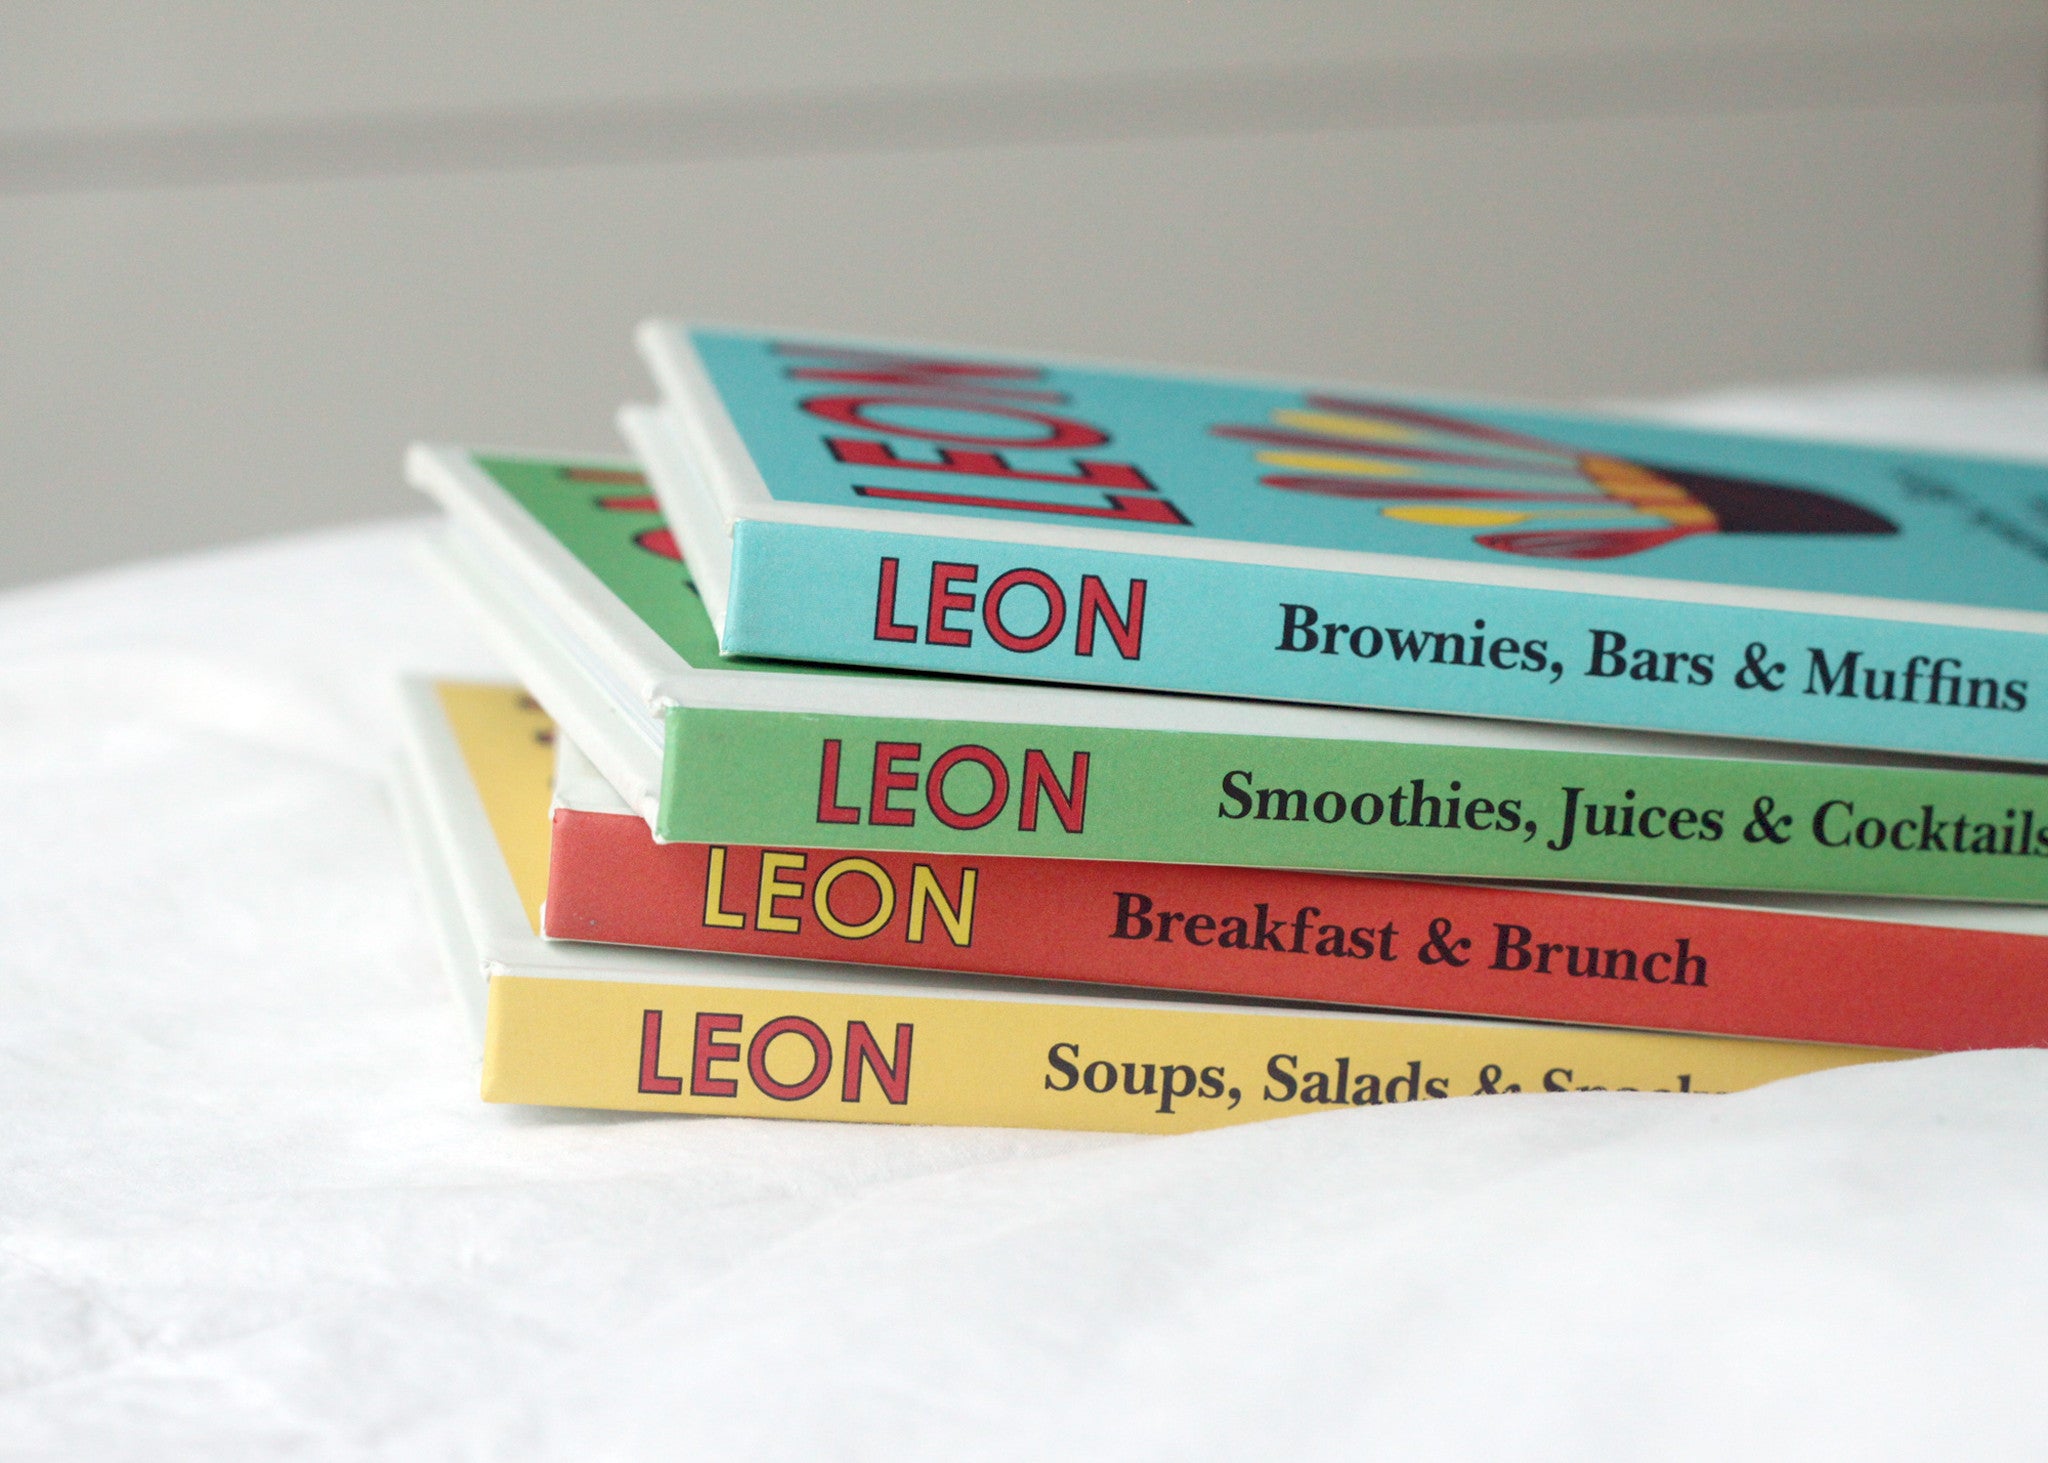 LEON: Brownies, Bars, and Muffins